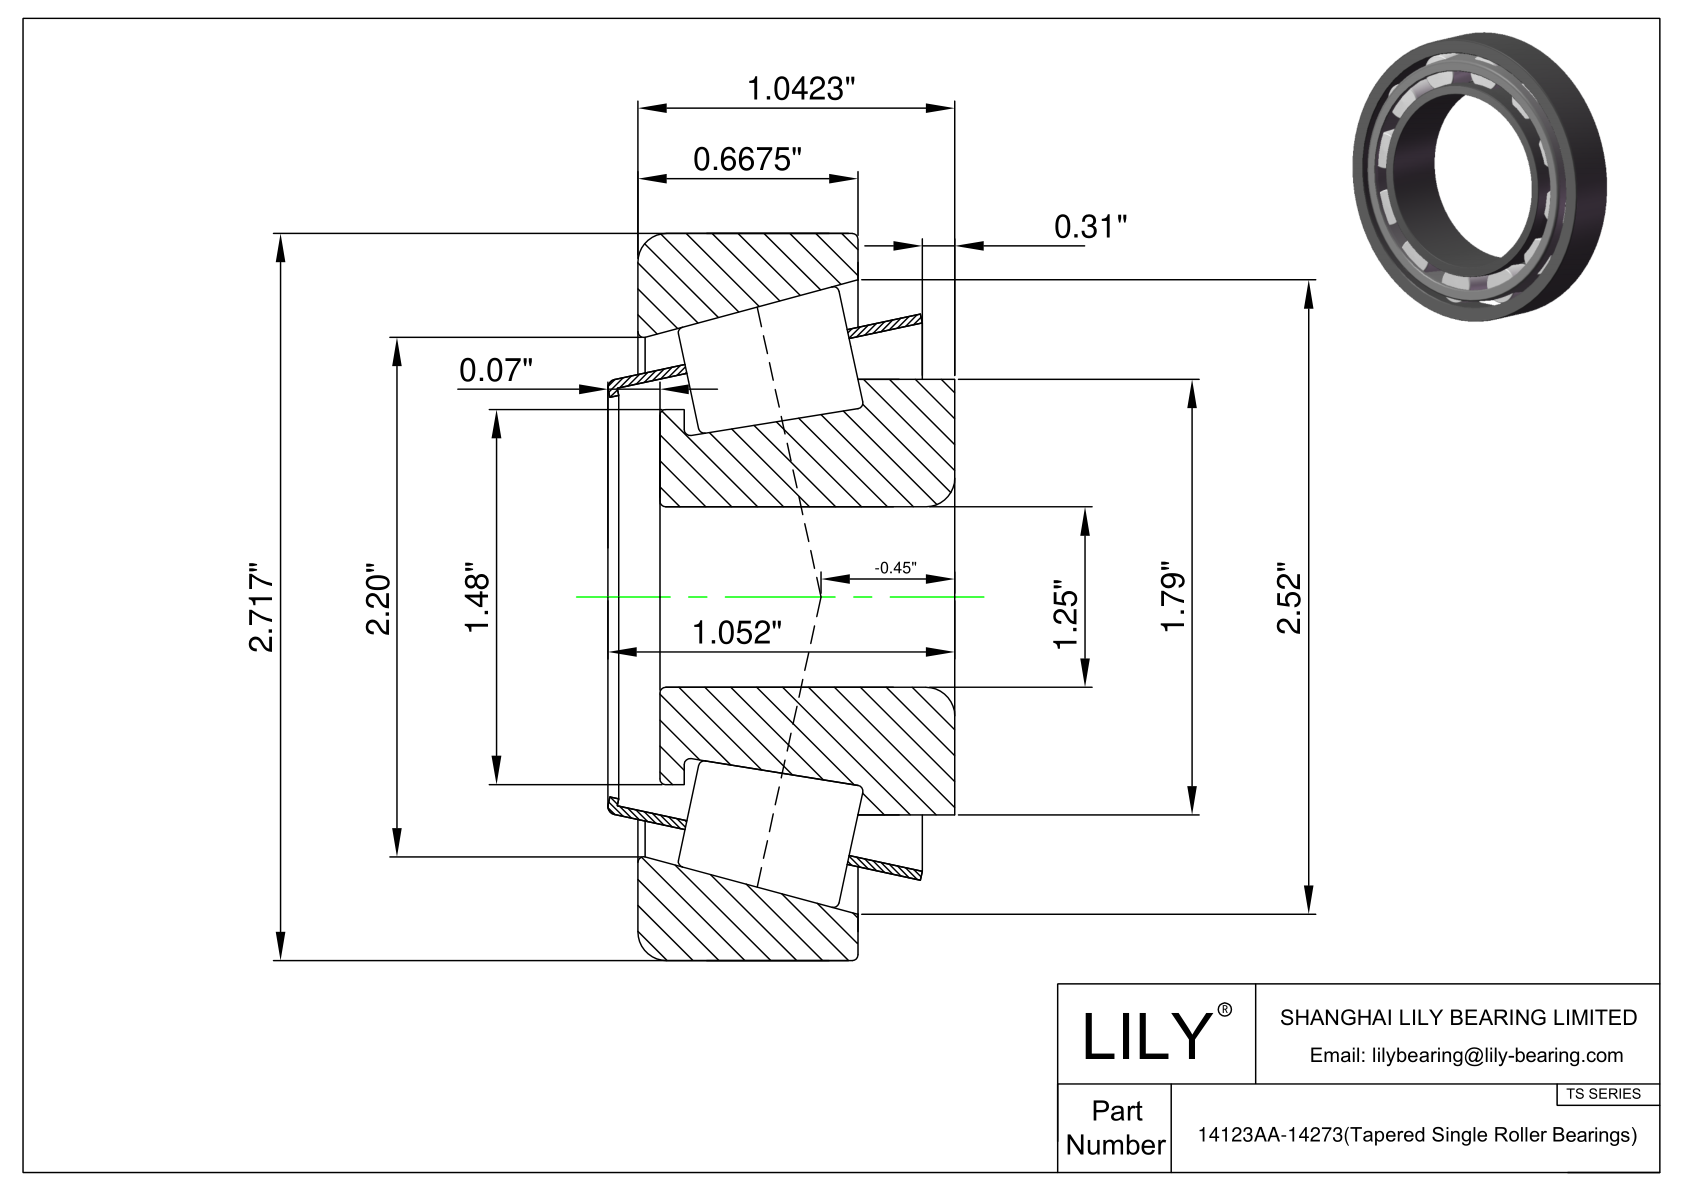 14123AA-14273 TS (Tapered Single Roller Bearings) (Imperial) cad drawing